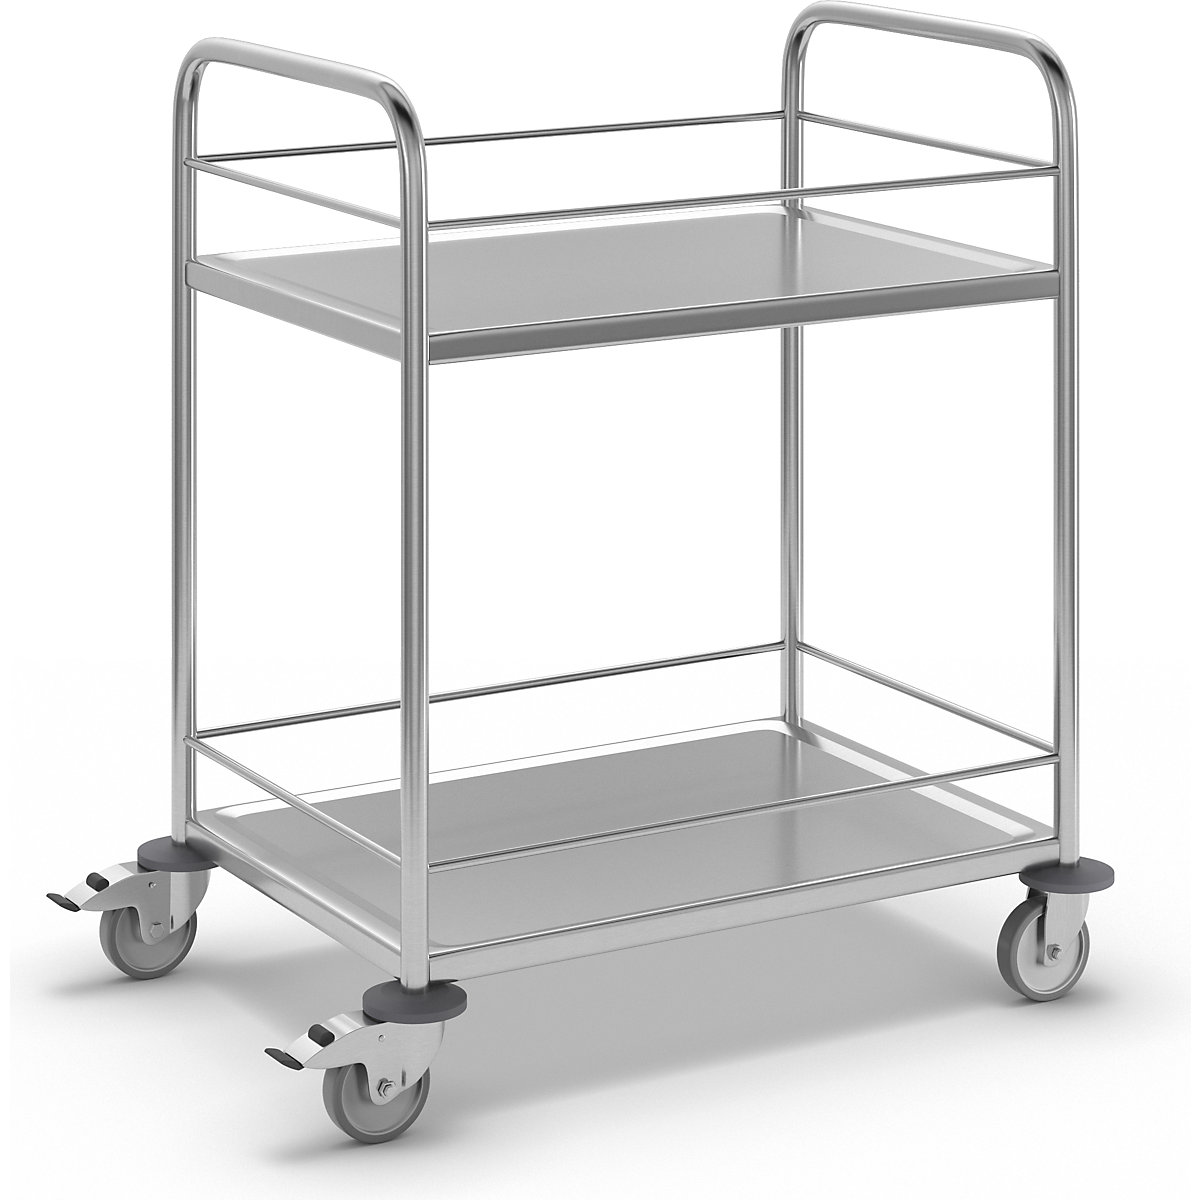 Stainless steel serving trolley – Kongamek, LxWxH 910 x 590 x 940 mm, with 2 shelves and raised edge-1